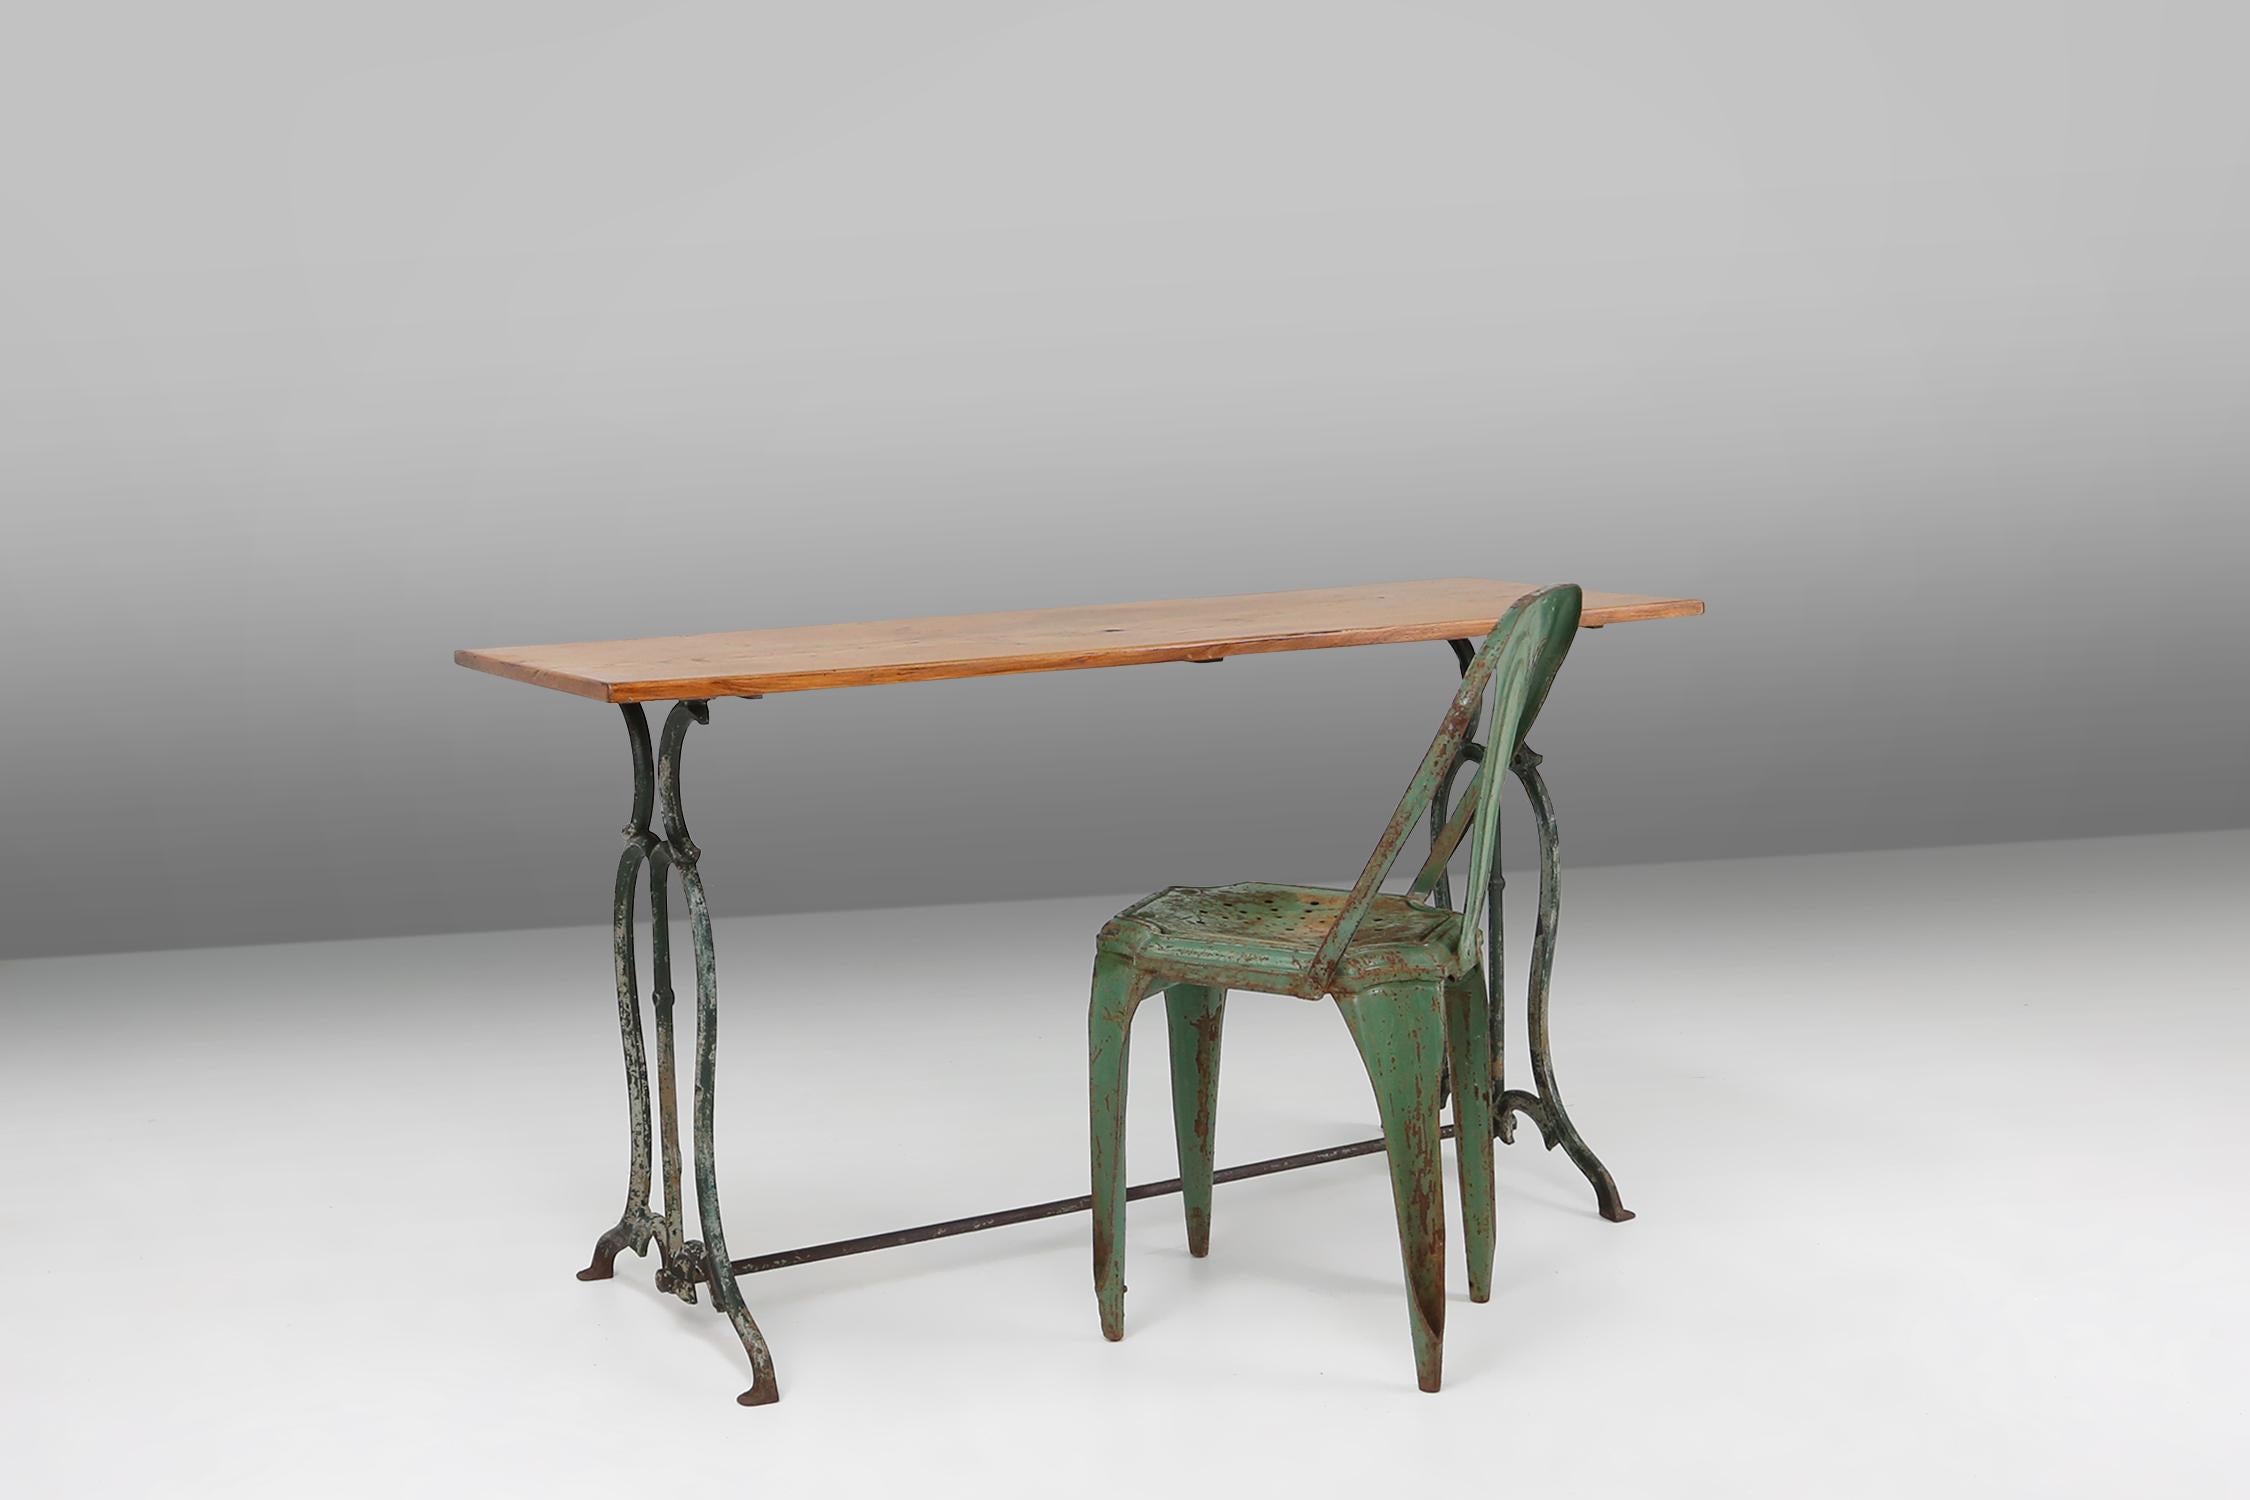 France / 1890 / bistro table / metal and oak / rustic / antique

A rectangular bistro table with graceful green metal legs and oak top made in France around 1890. This table is professionally restored. 

This stylish antique table is the perfect